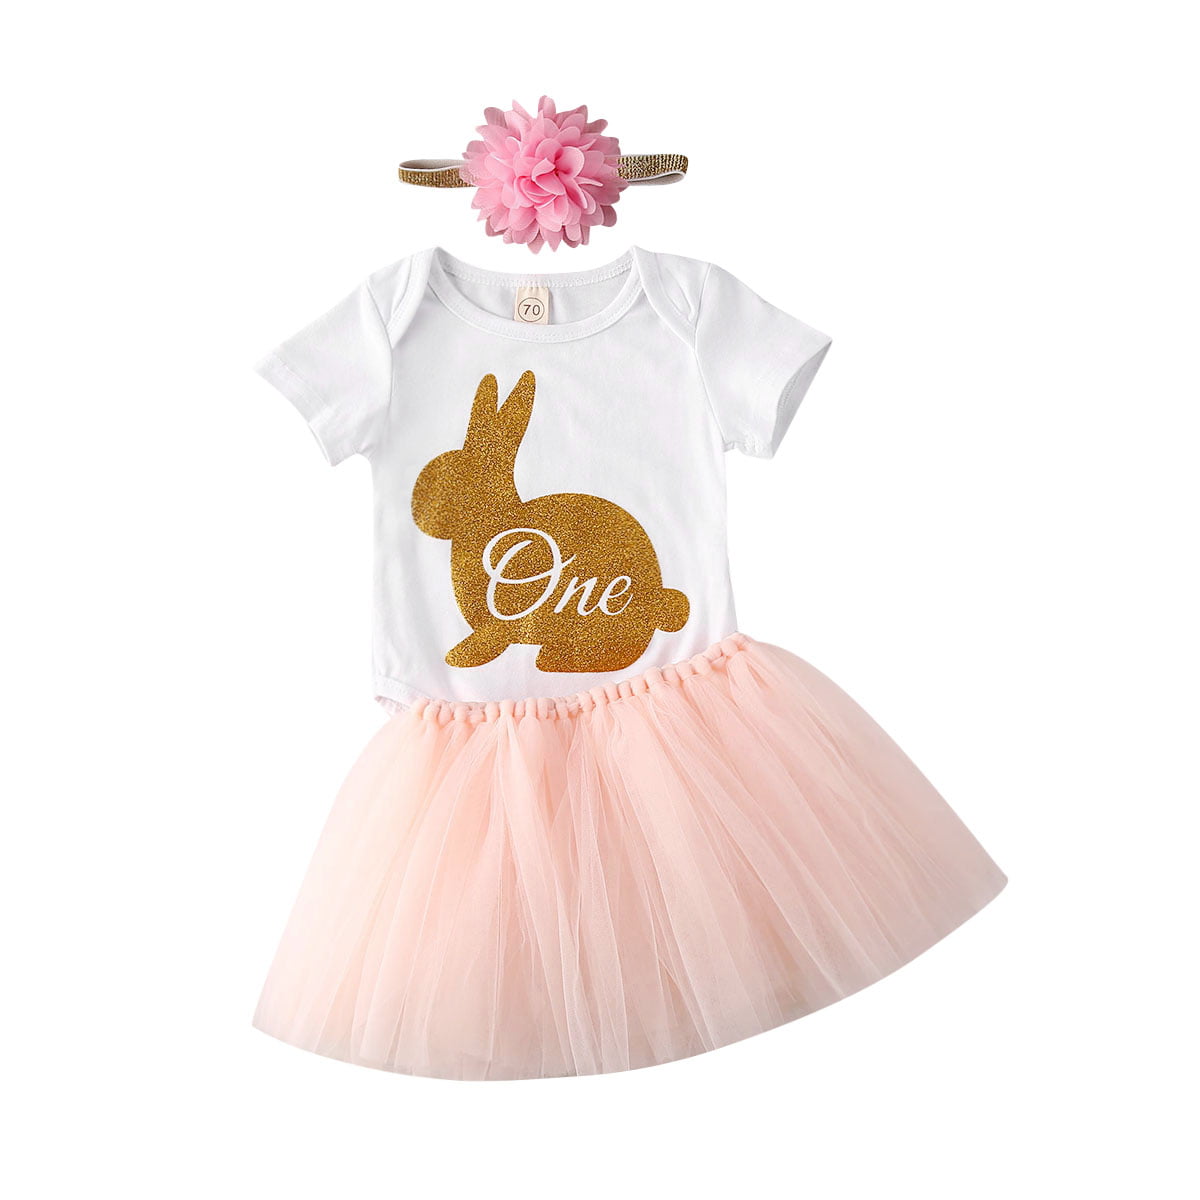 2PCs Easter Toddler Newborn Baby Girl Romper Jumpsuit V-Neck Lace Flying Sleeves Bunny Doll Princess Tutu Dress Bow Headband 0-24 Months Girls Bodysuit Crawling Pants Casual Clothes Set